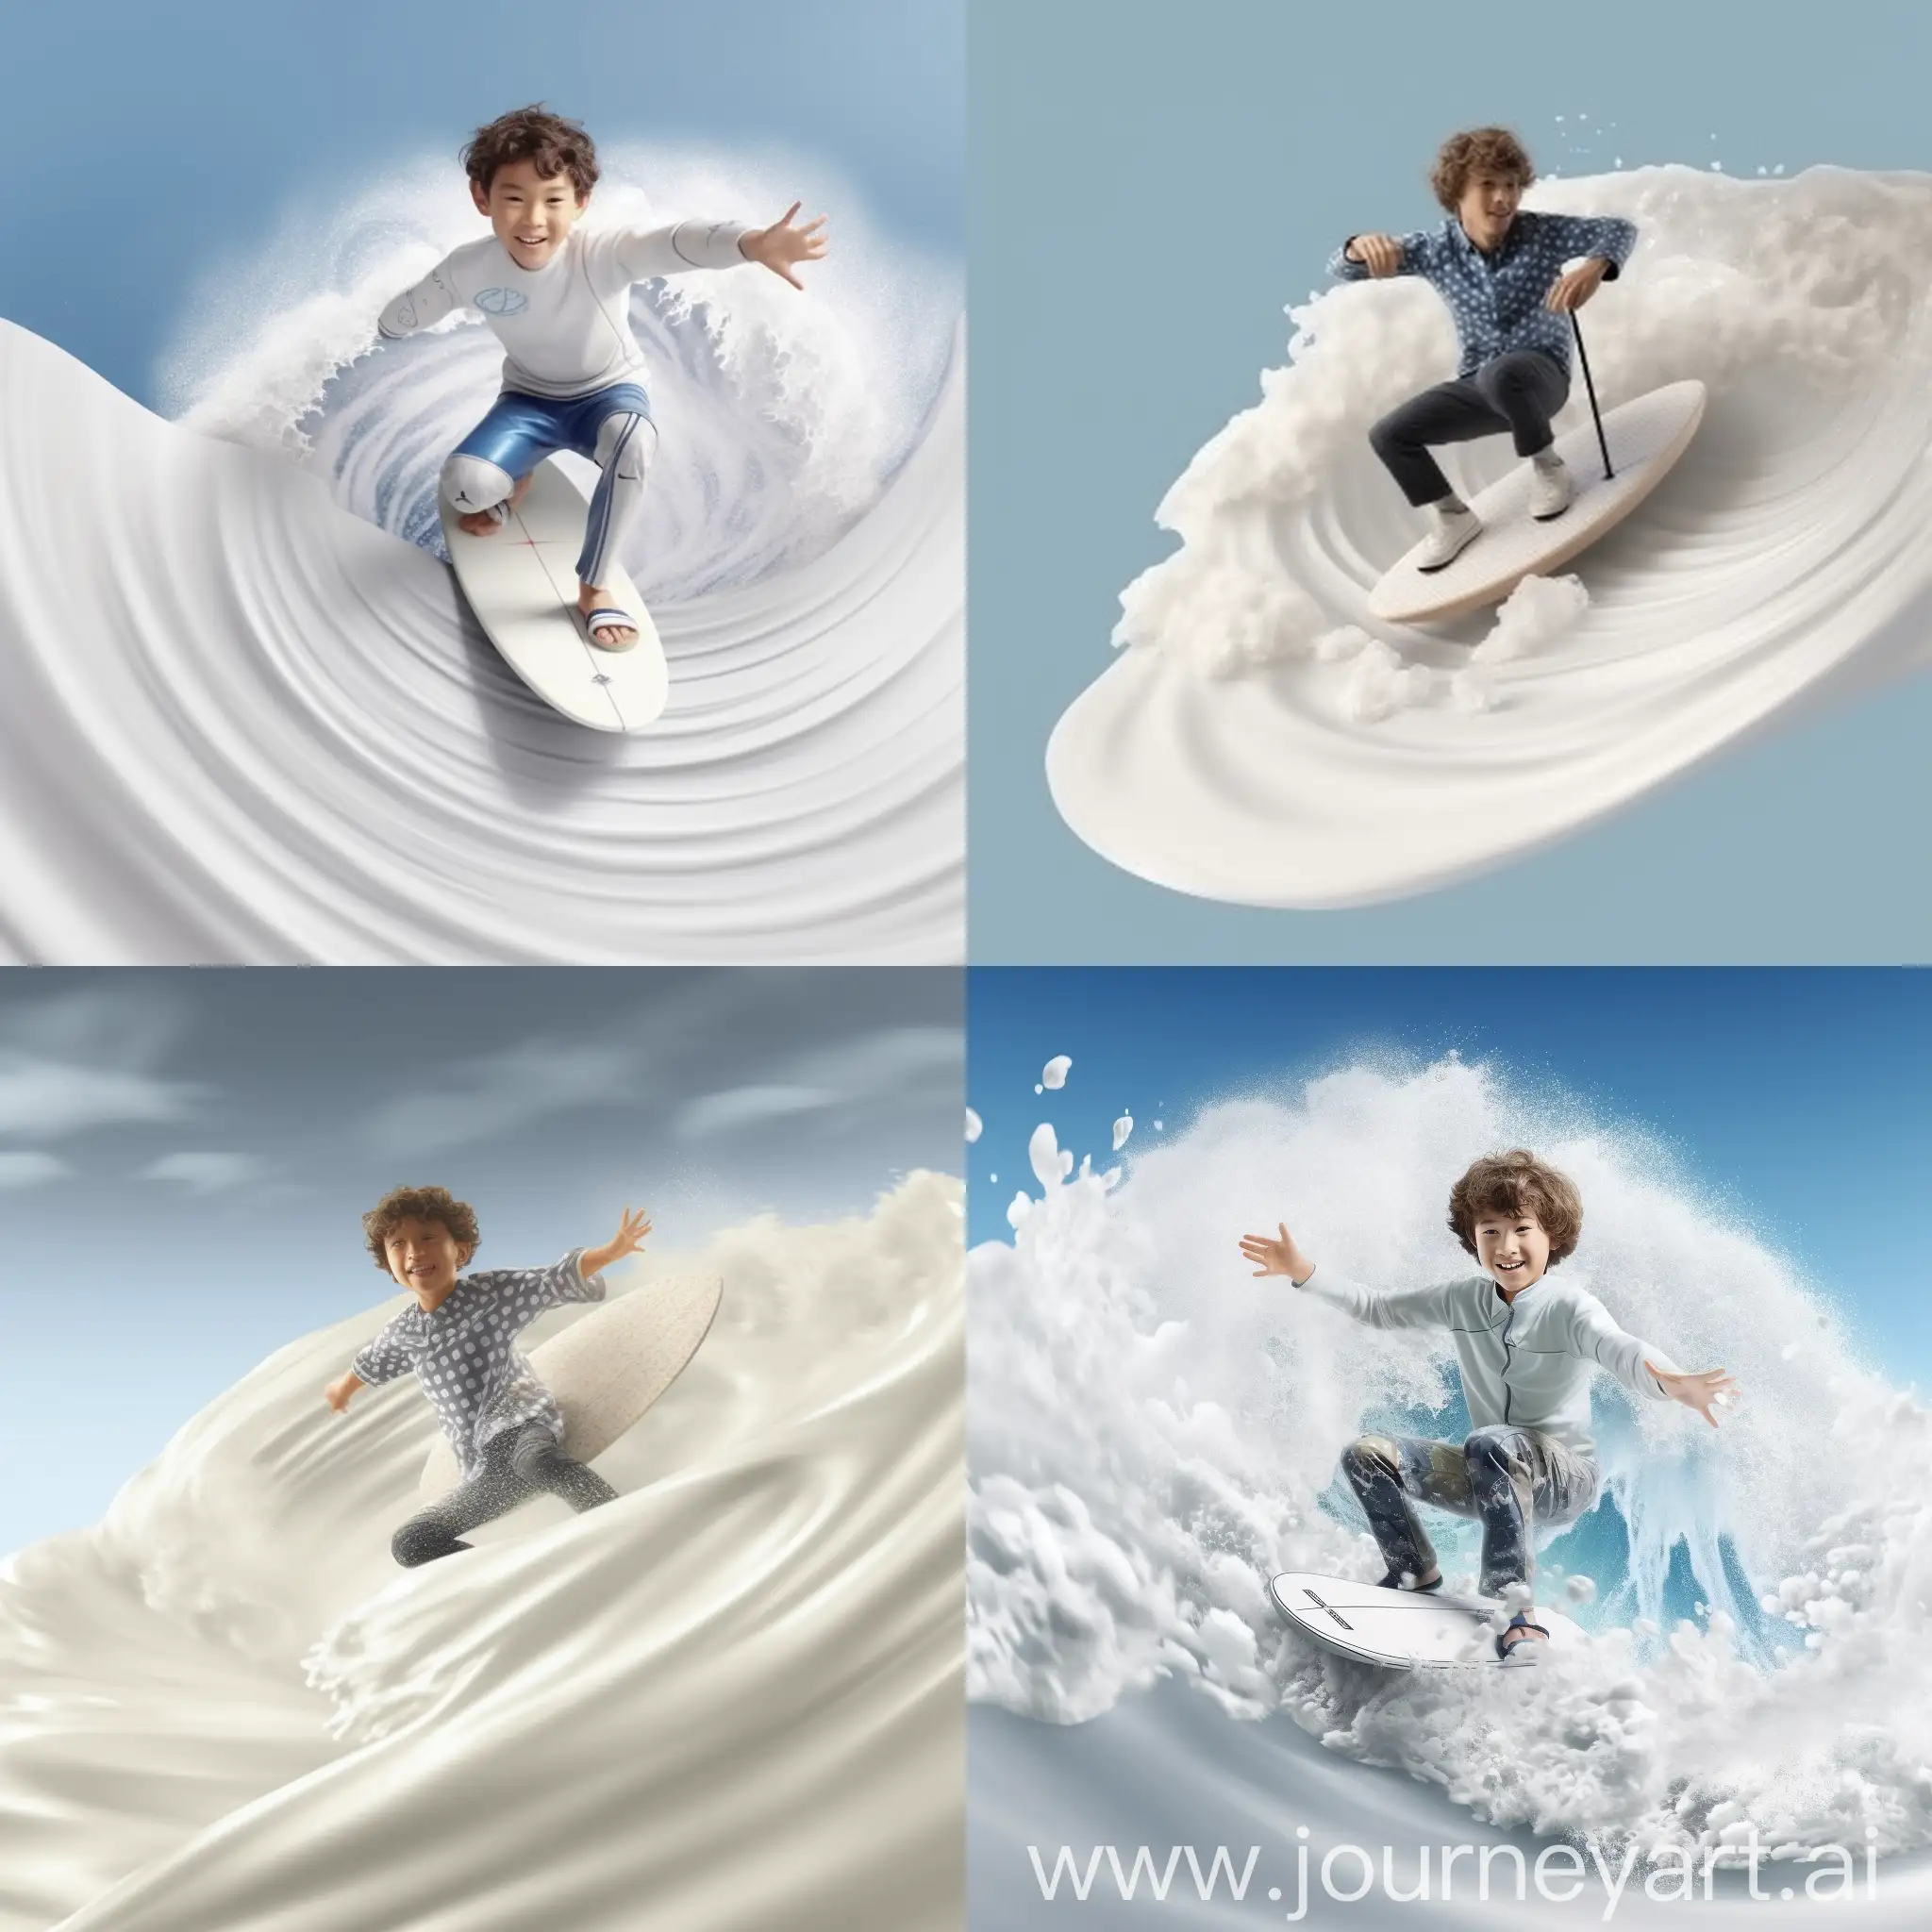 Chinese-Boy-Surfing-in-Milky-Waters-3D-Rendered-UltraClear-8K-Image